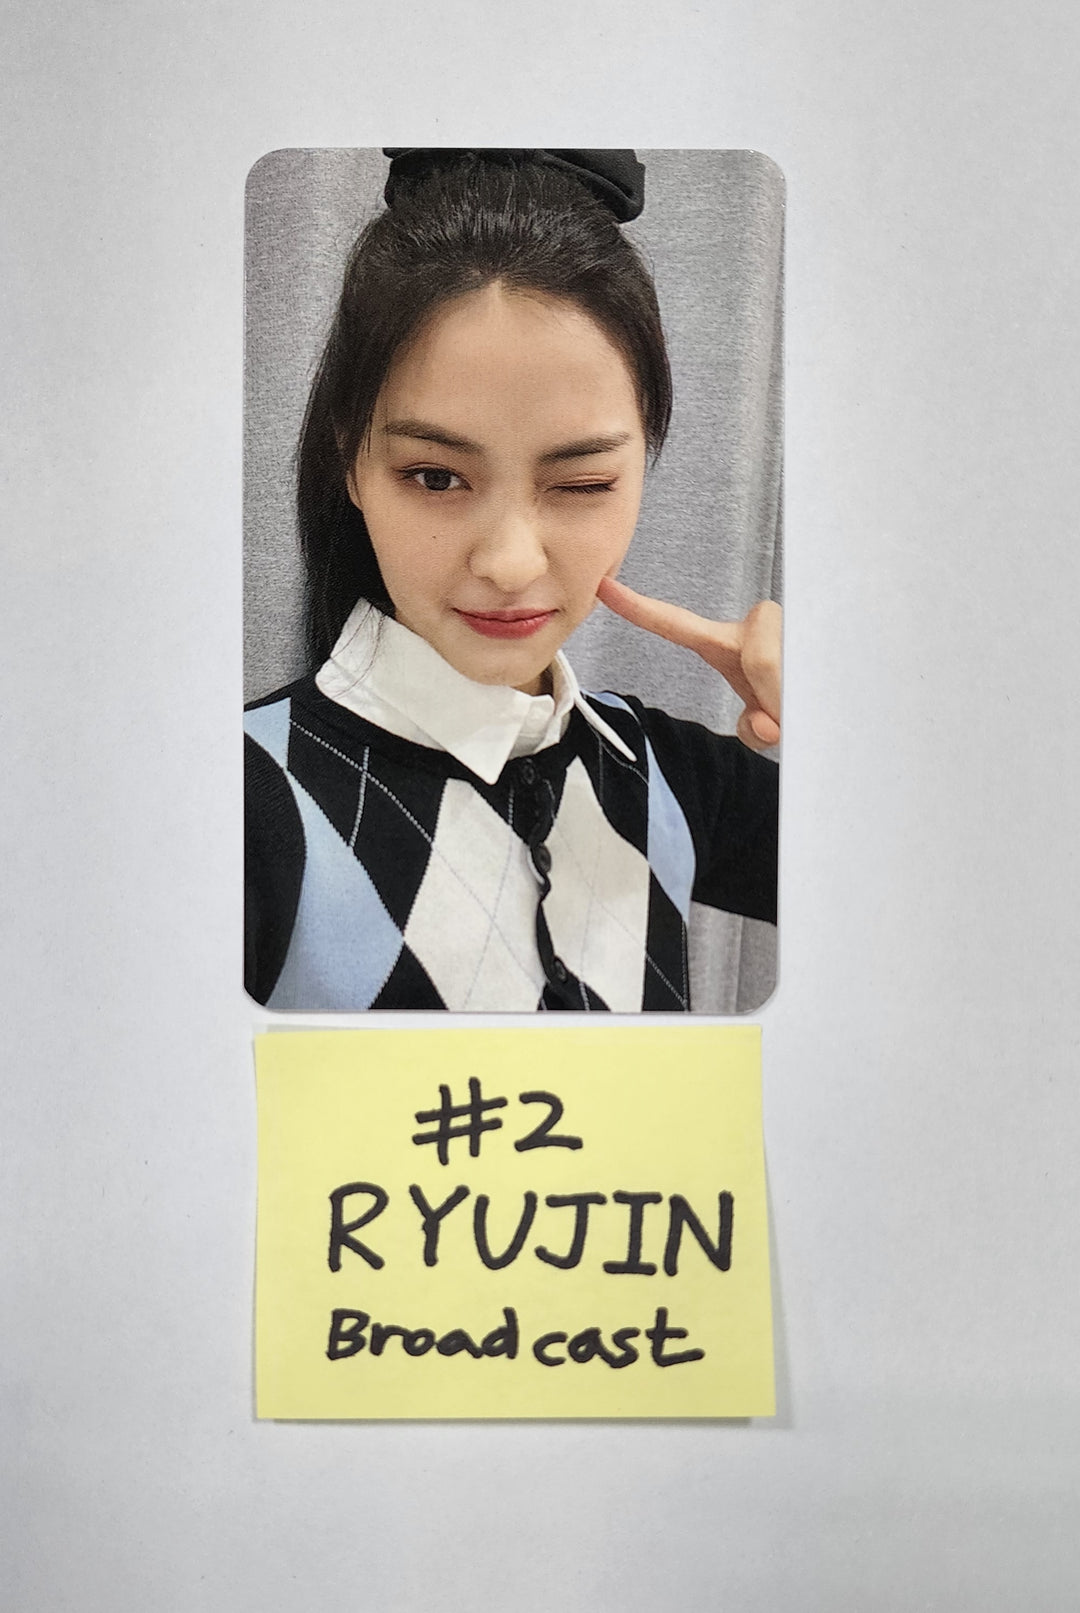 RJ, Lia (Of ITZY) ‘CHECKMATE’ - Broadcast Photocard